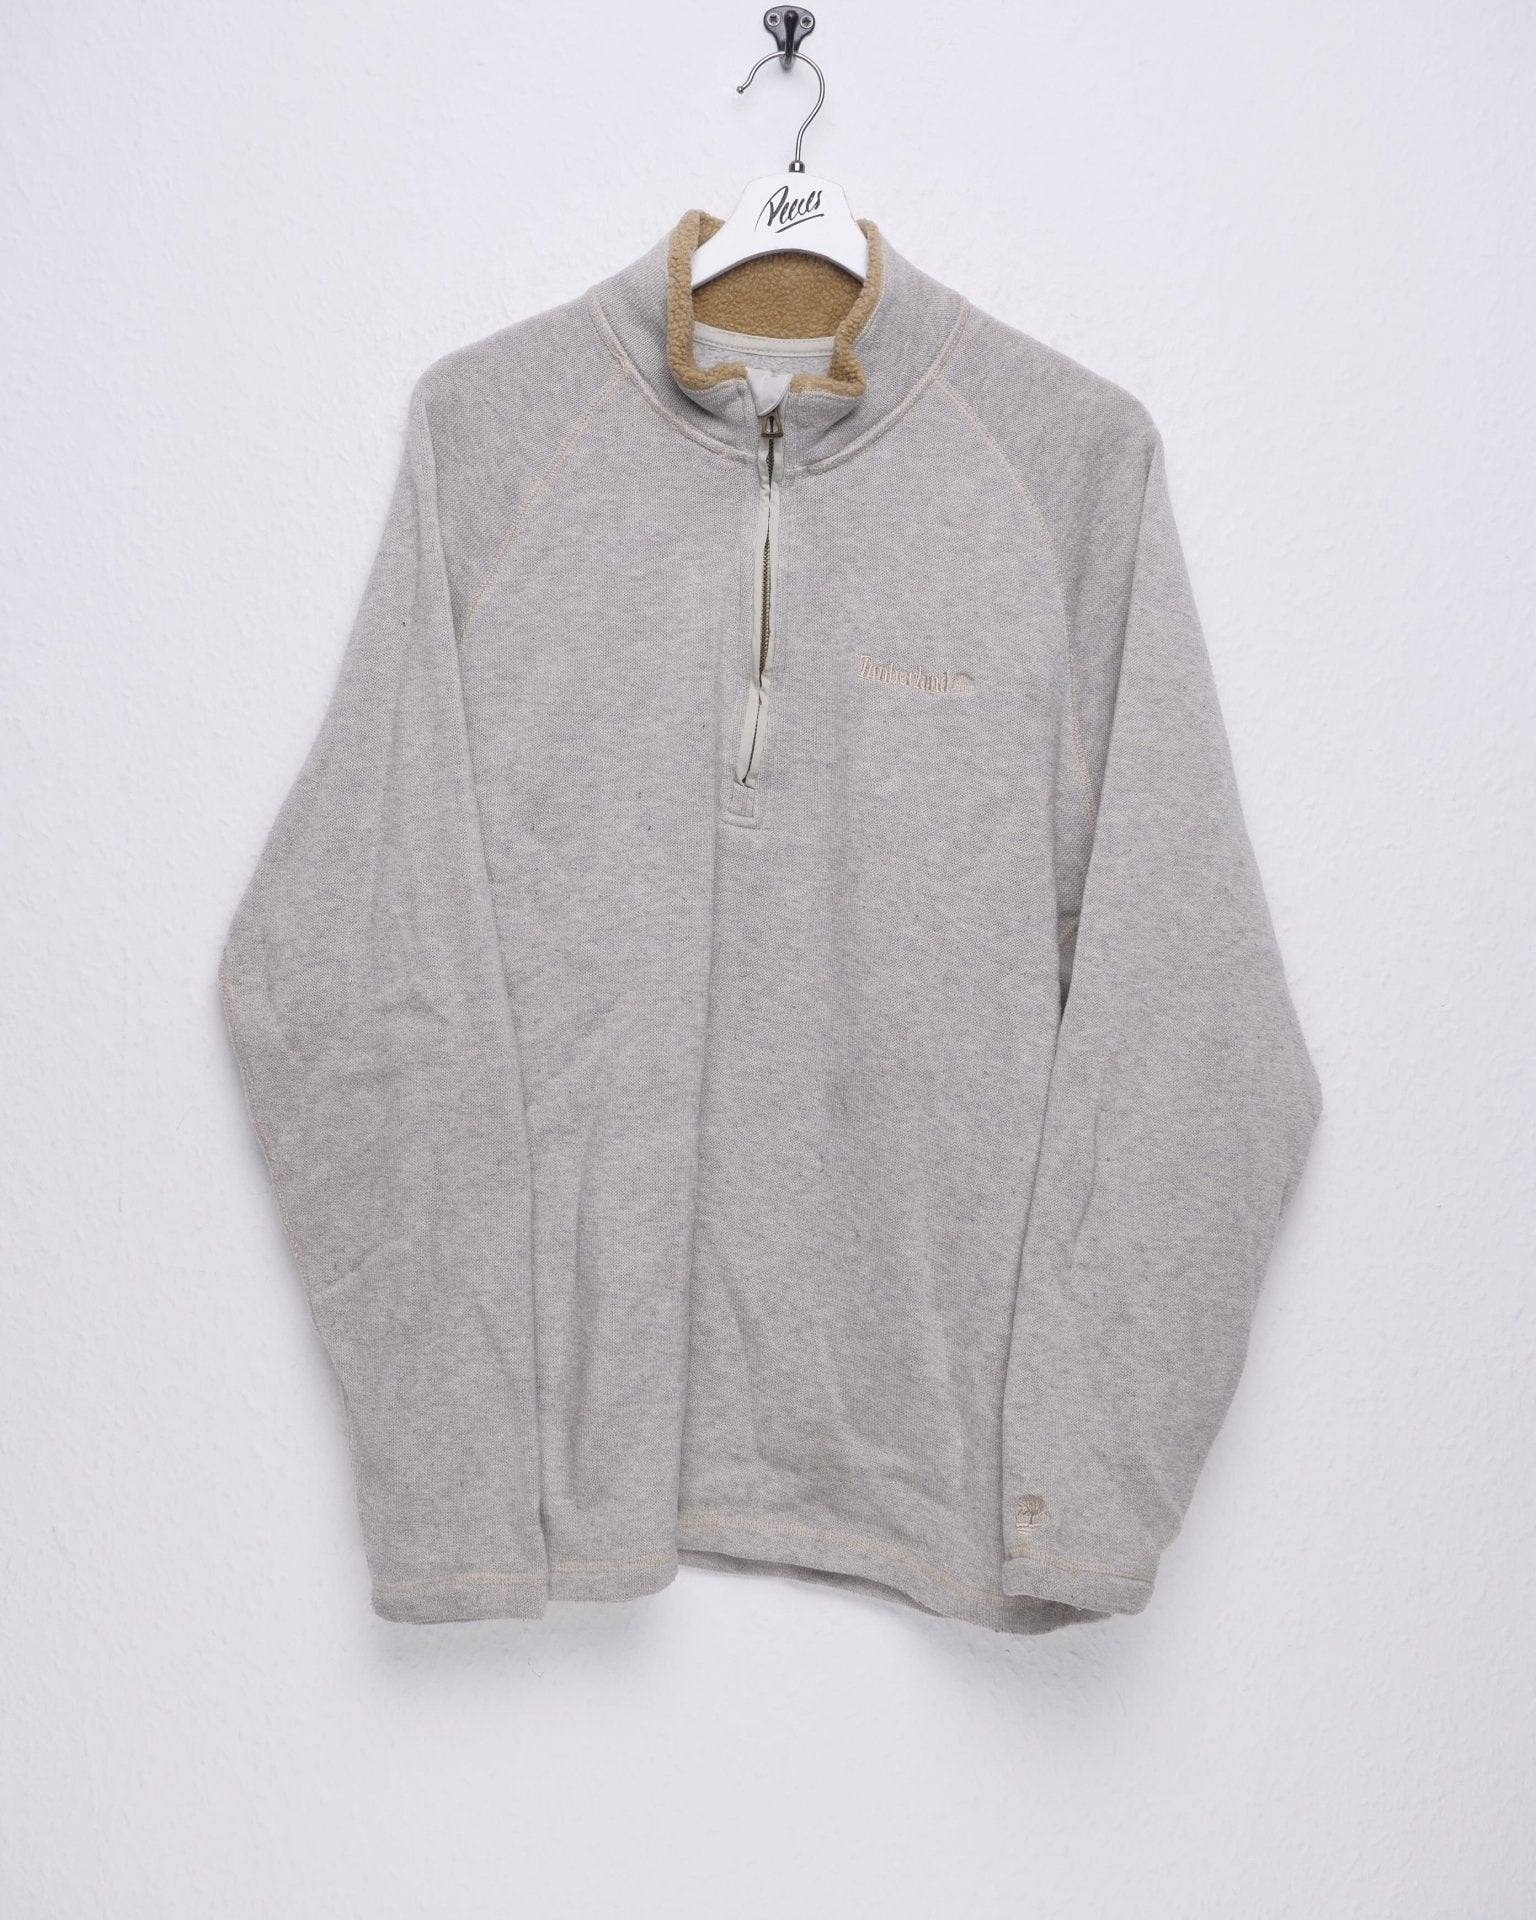 Timberland embroidered Spellout Vintage Half Zip Sweater - Peeces